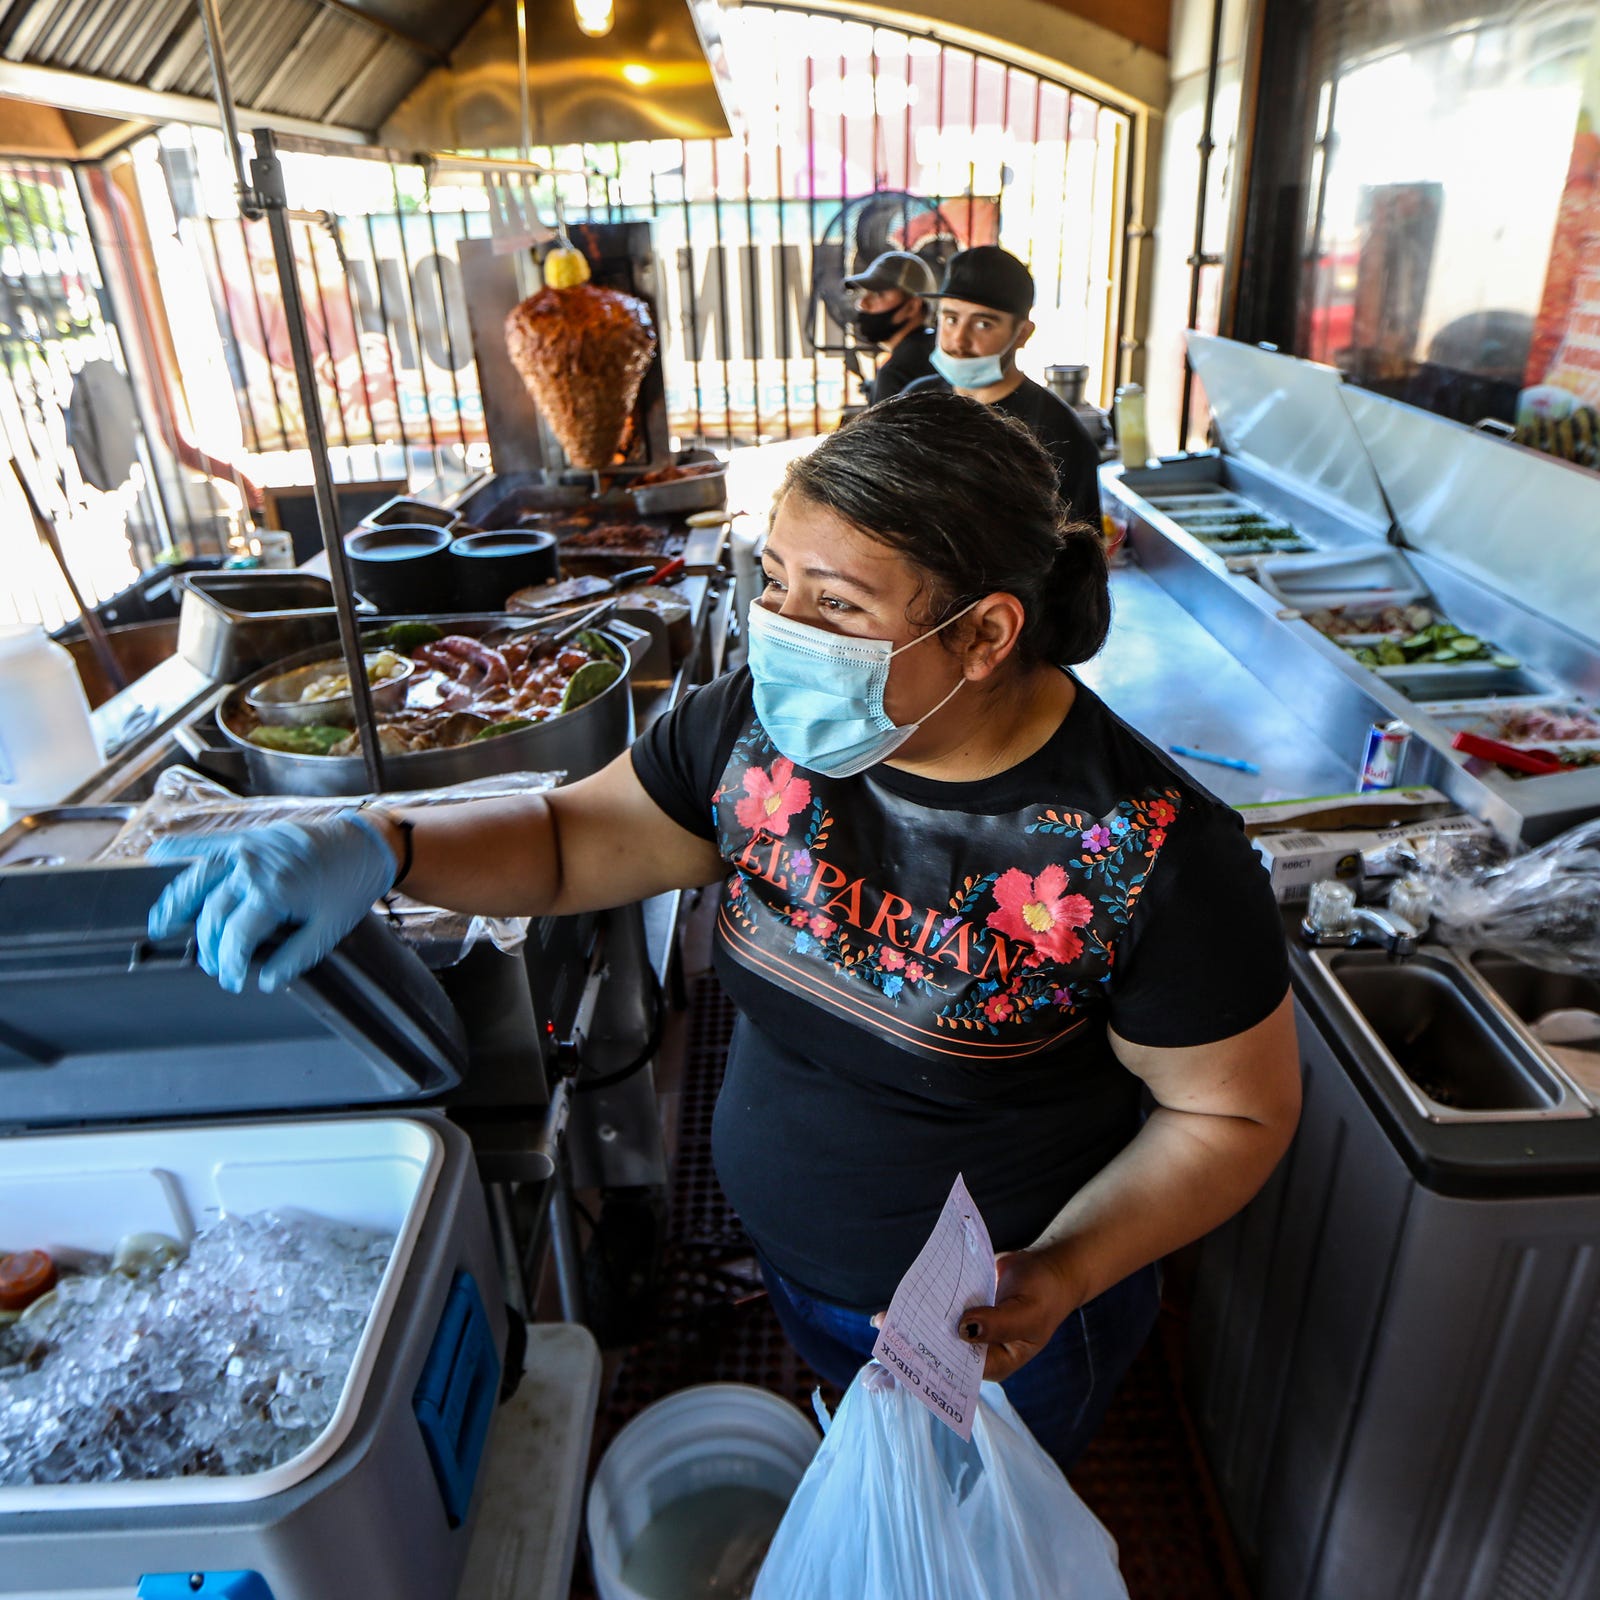 Co-owner Nancy Diaz prepares and hands over a to-go order at La Palapa del Parian Mexican restaurant in southwest Detroit, photographed on Friday, July 24, 2020. Diaz says the restaurant serves a mix between street food and authentic cuisine from Jalisco, Mexico. 